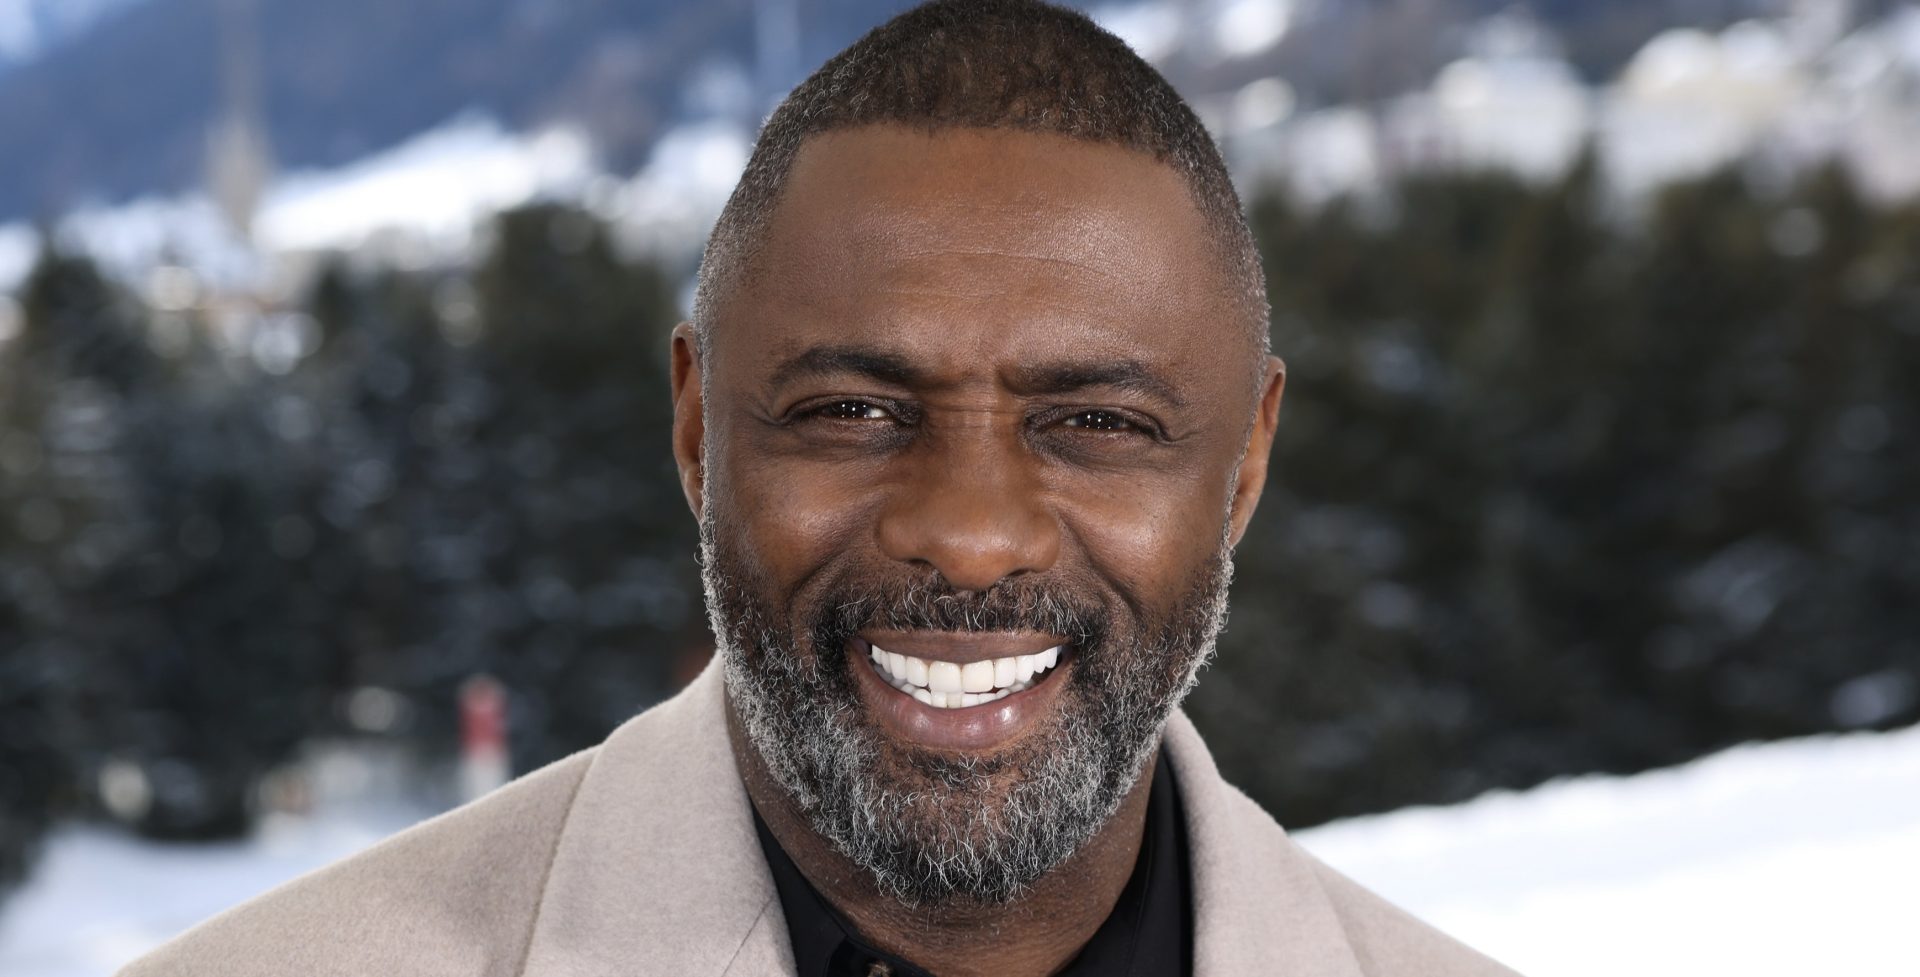 Idris Elba Reveals Why He Rejects ‘Black Actor’ Label